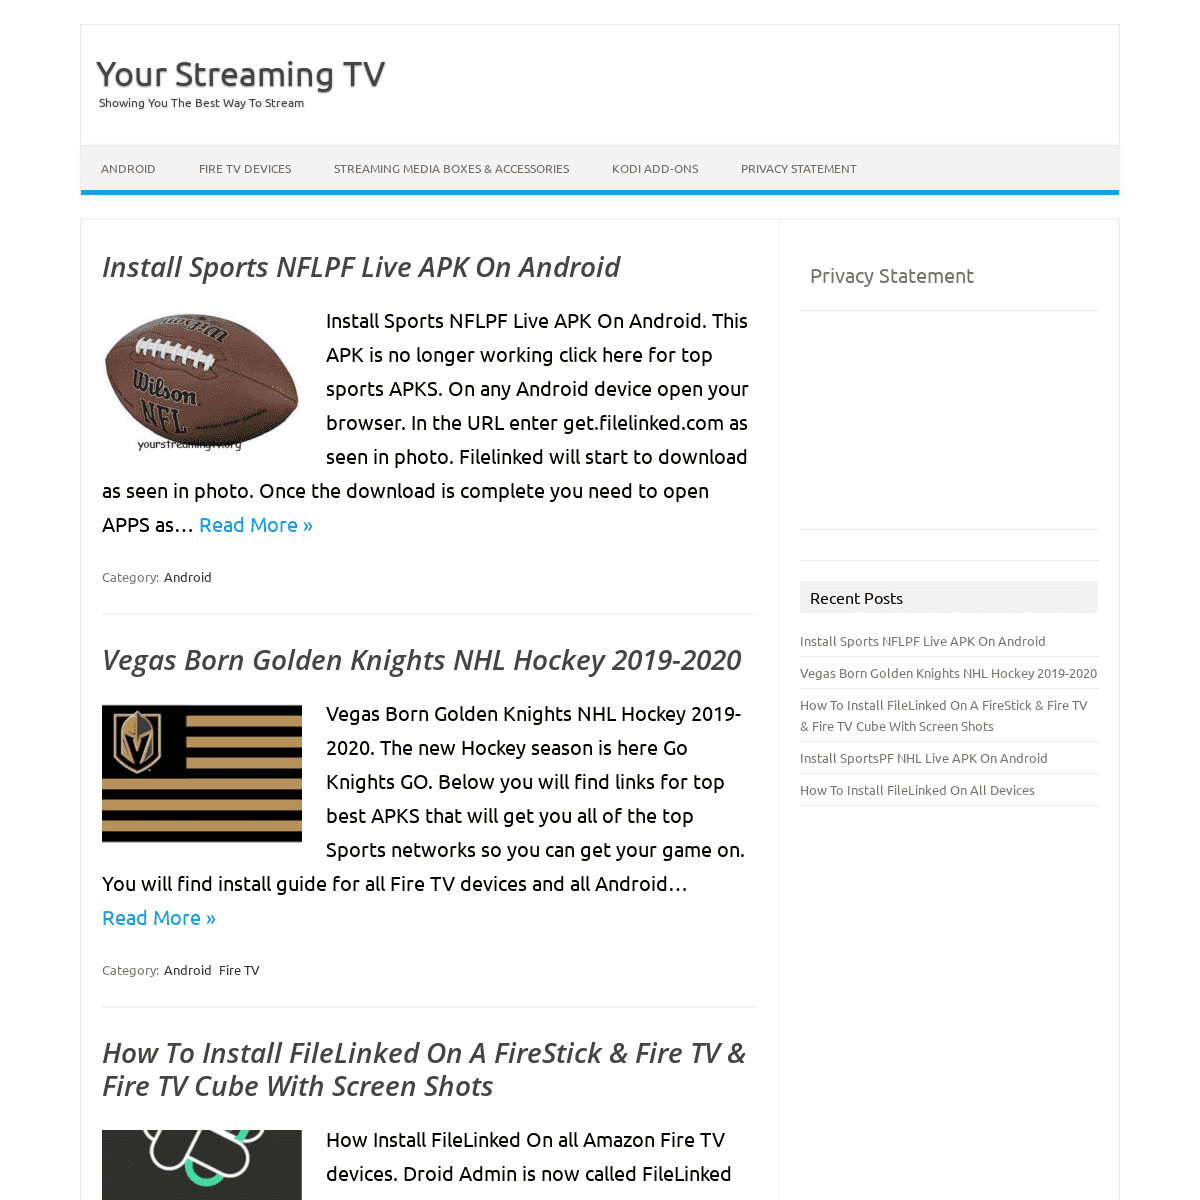 A complete backup of yourstreamingtv.org